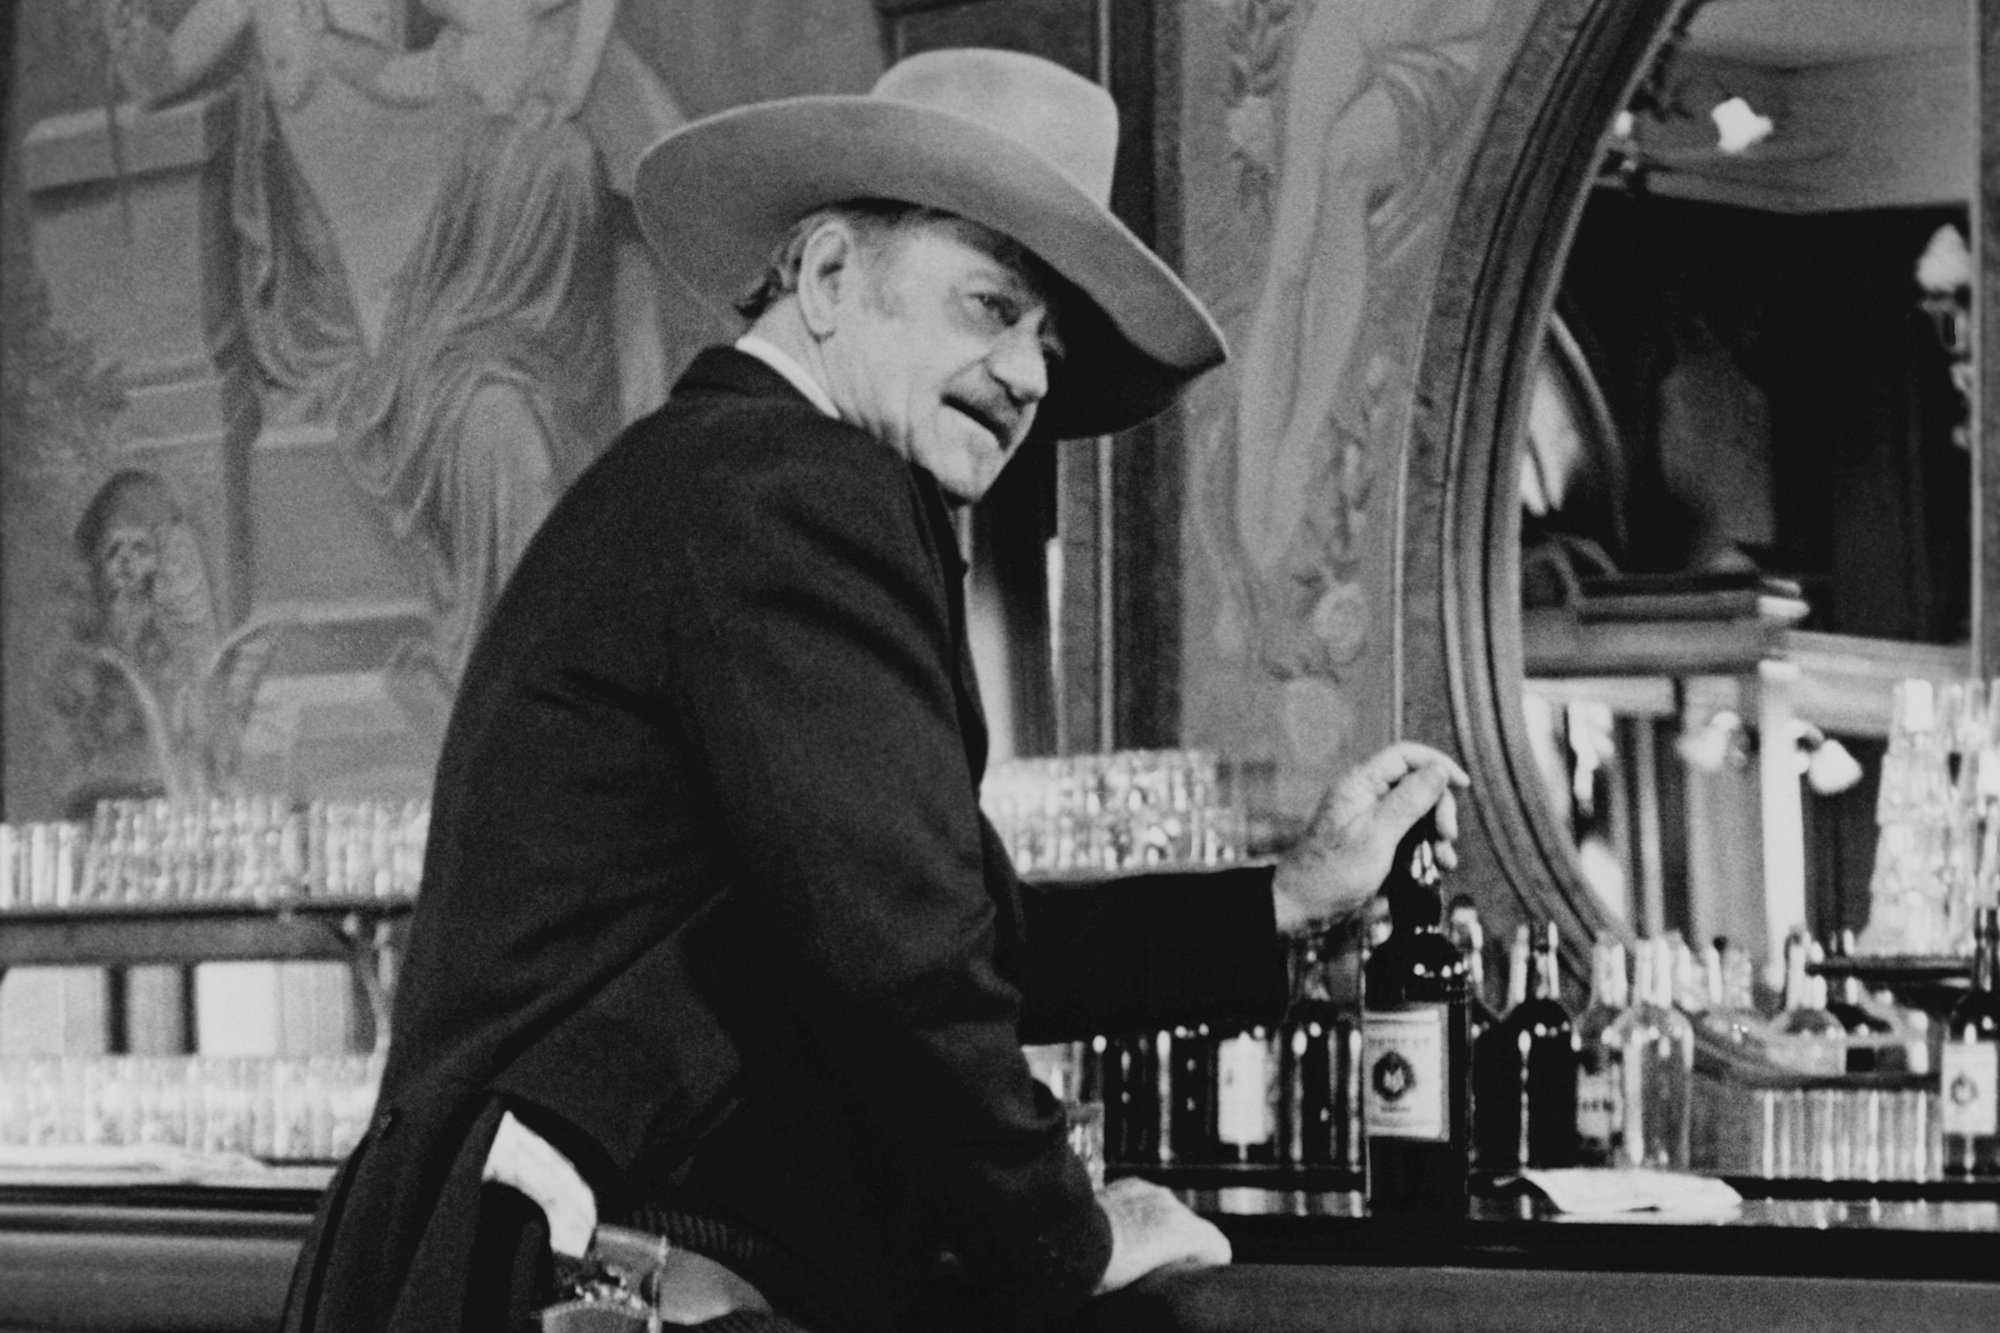 'The Shootist' actor John Wayne as J.B. Books standing at a bar while he's wearing a Western movie costume